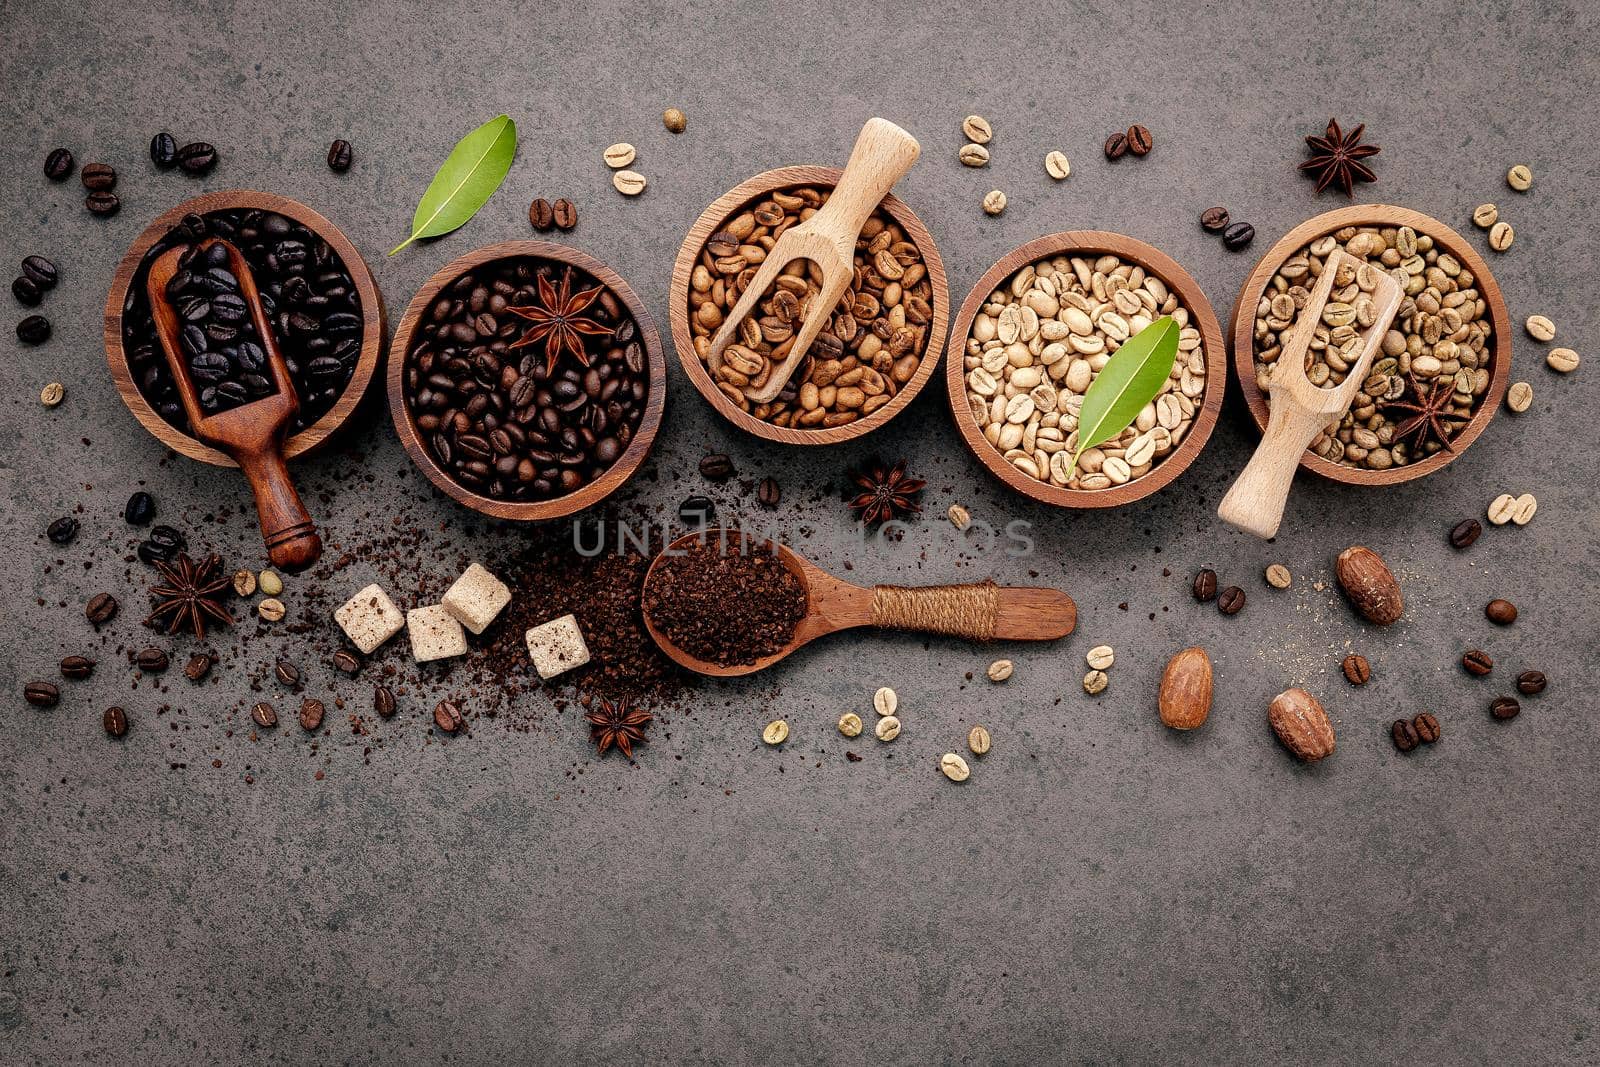 Green and brown unroasted and dark roasted coffee beans in wooden bowl with spoons set up on dark concrete background. by kerdkanno